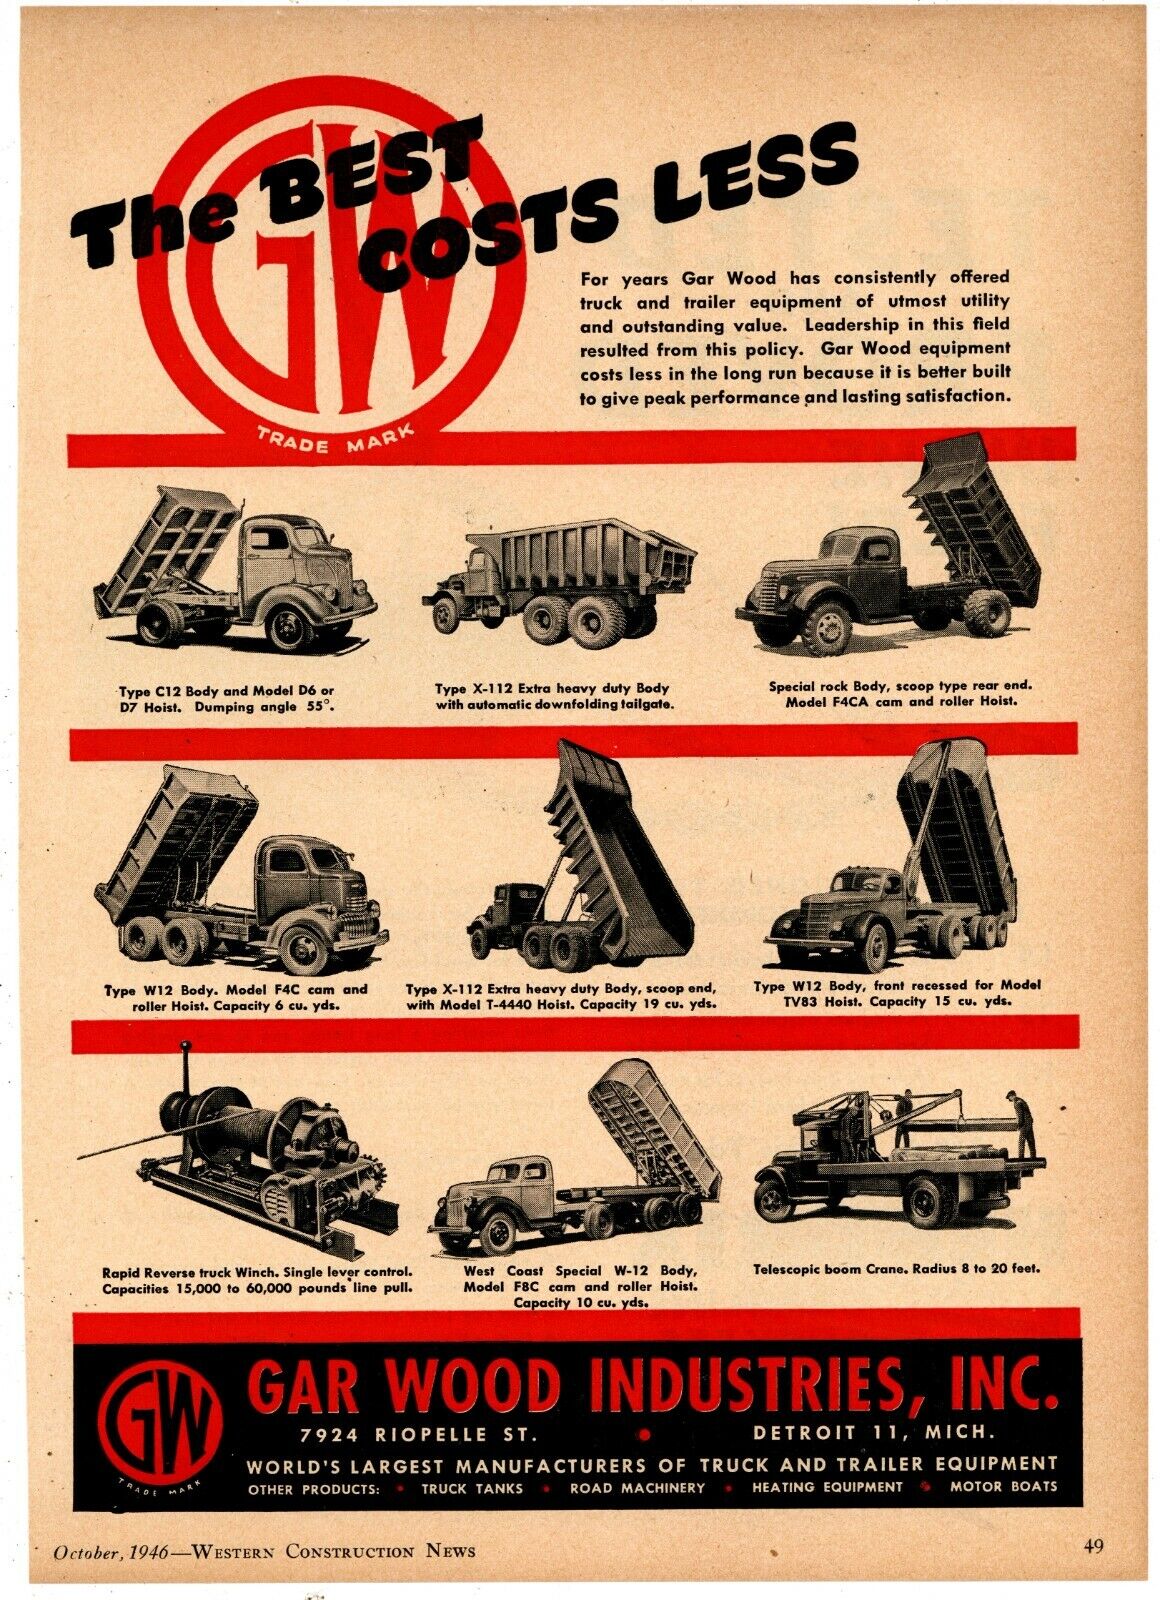 1946 Gar Wood Industries Ad: Commercial Truck Bodies Pictured - Detroit Michigan